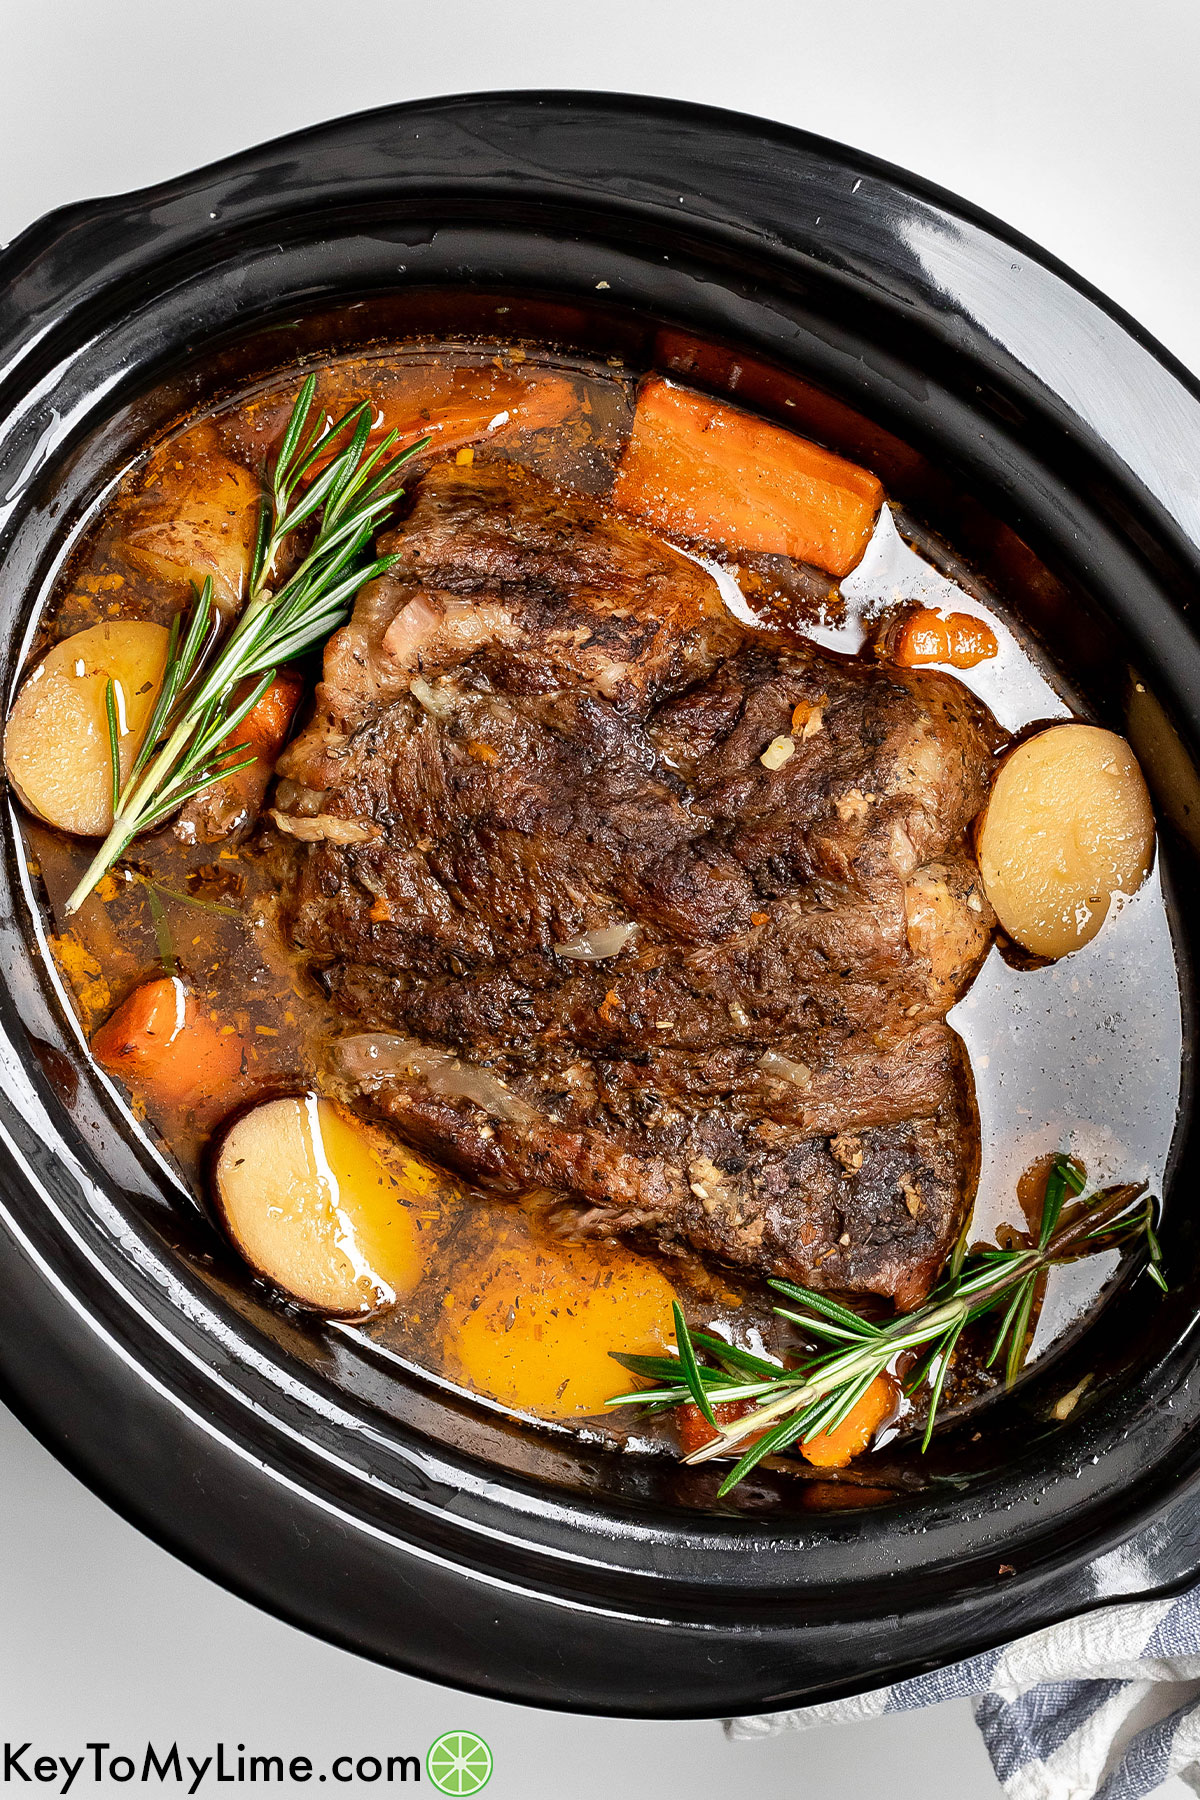 An overhead image of a fully cooked pork roast resting in slow cooker with potatoes and carrots throughout.